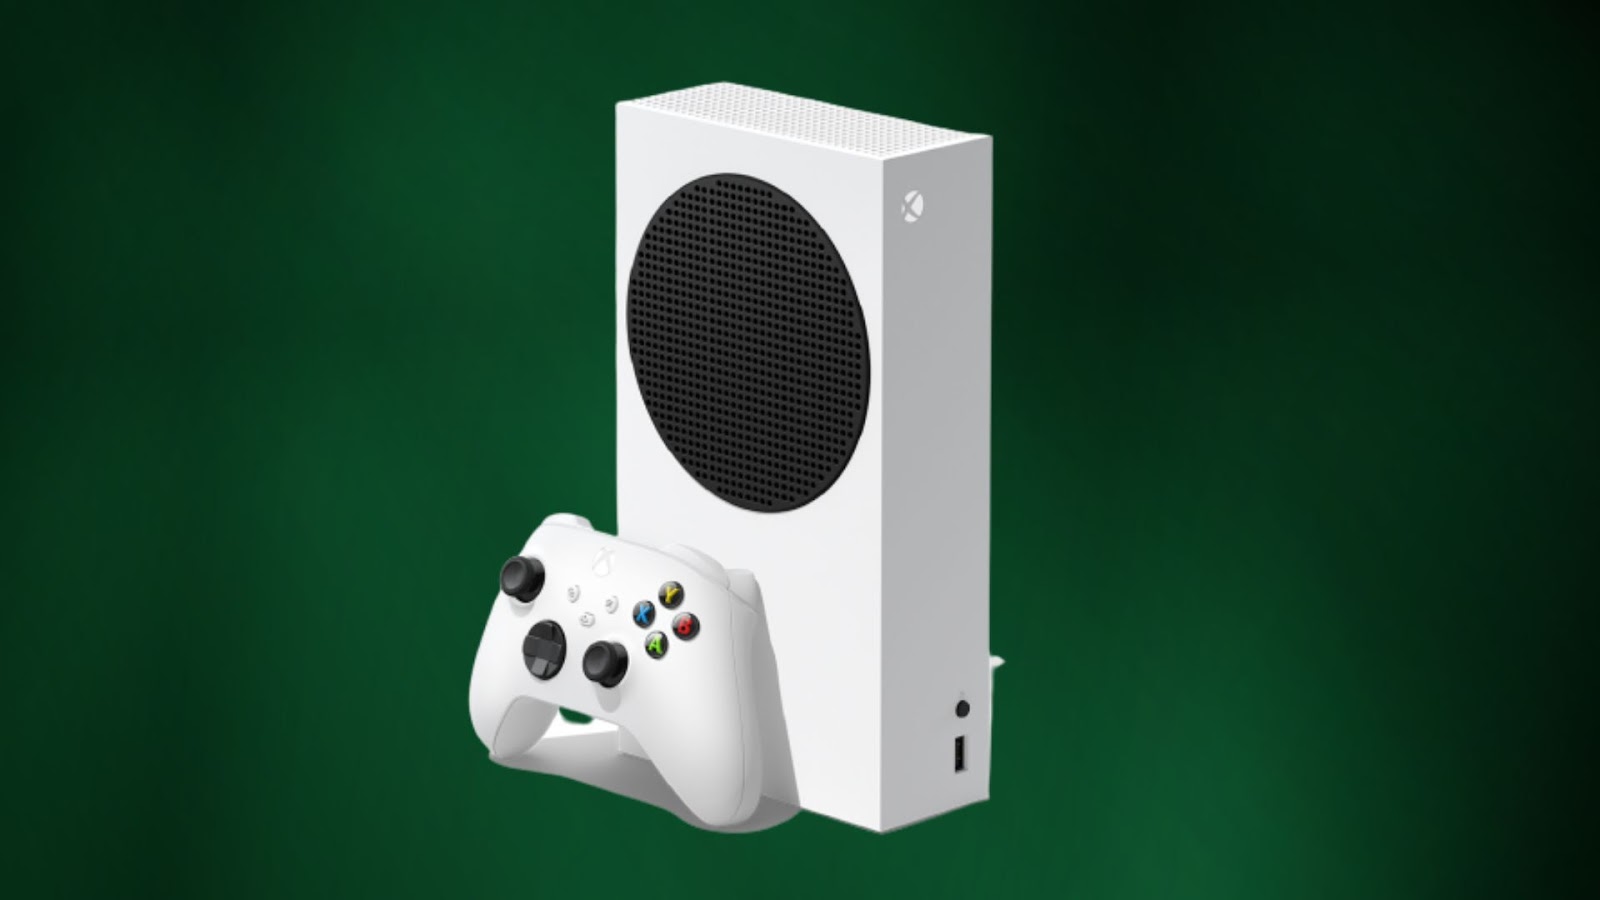 The Fourth Generation Xbox - Xbox Series S